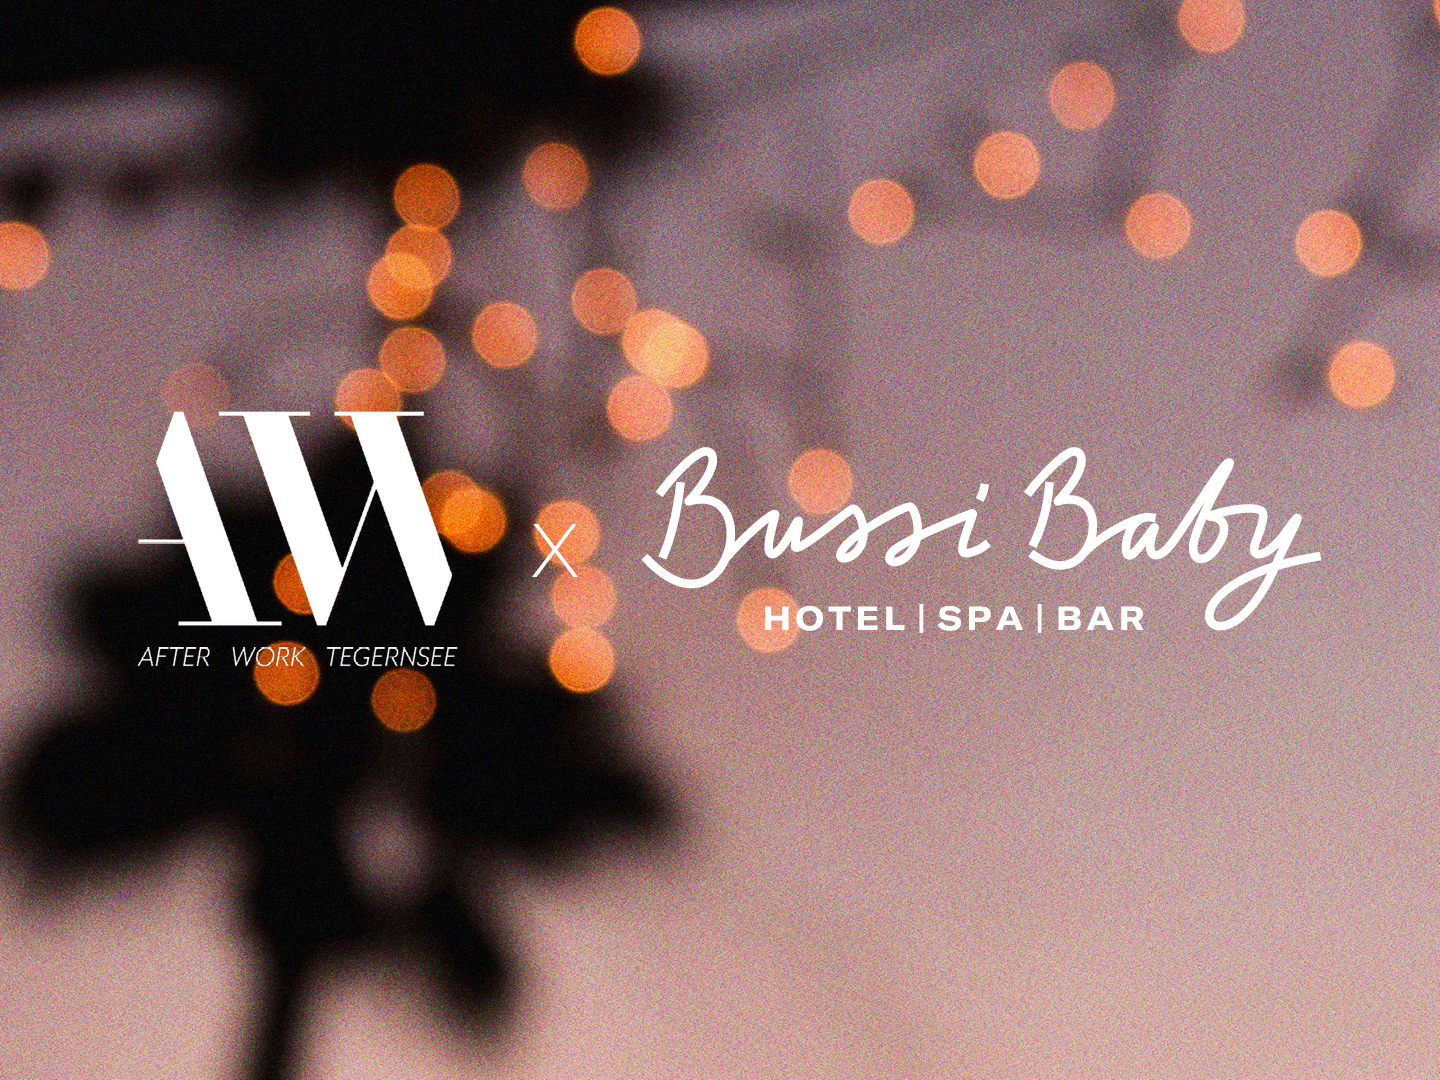 "After Work" Logo Hotel Bussi Baby 